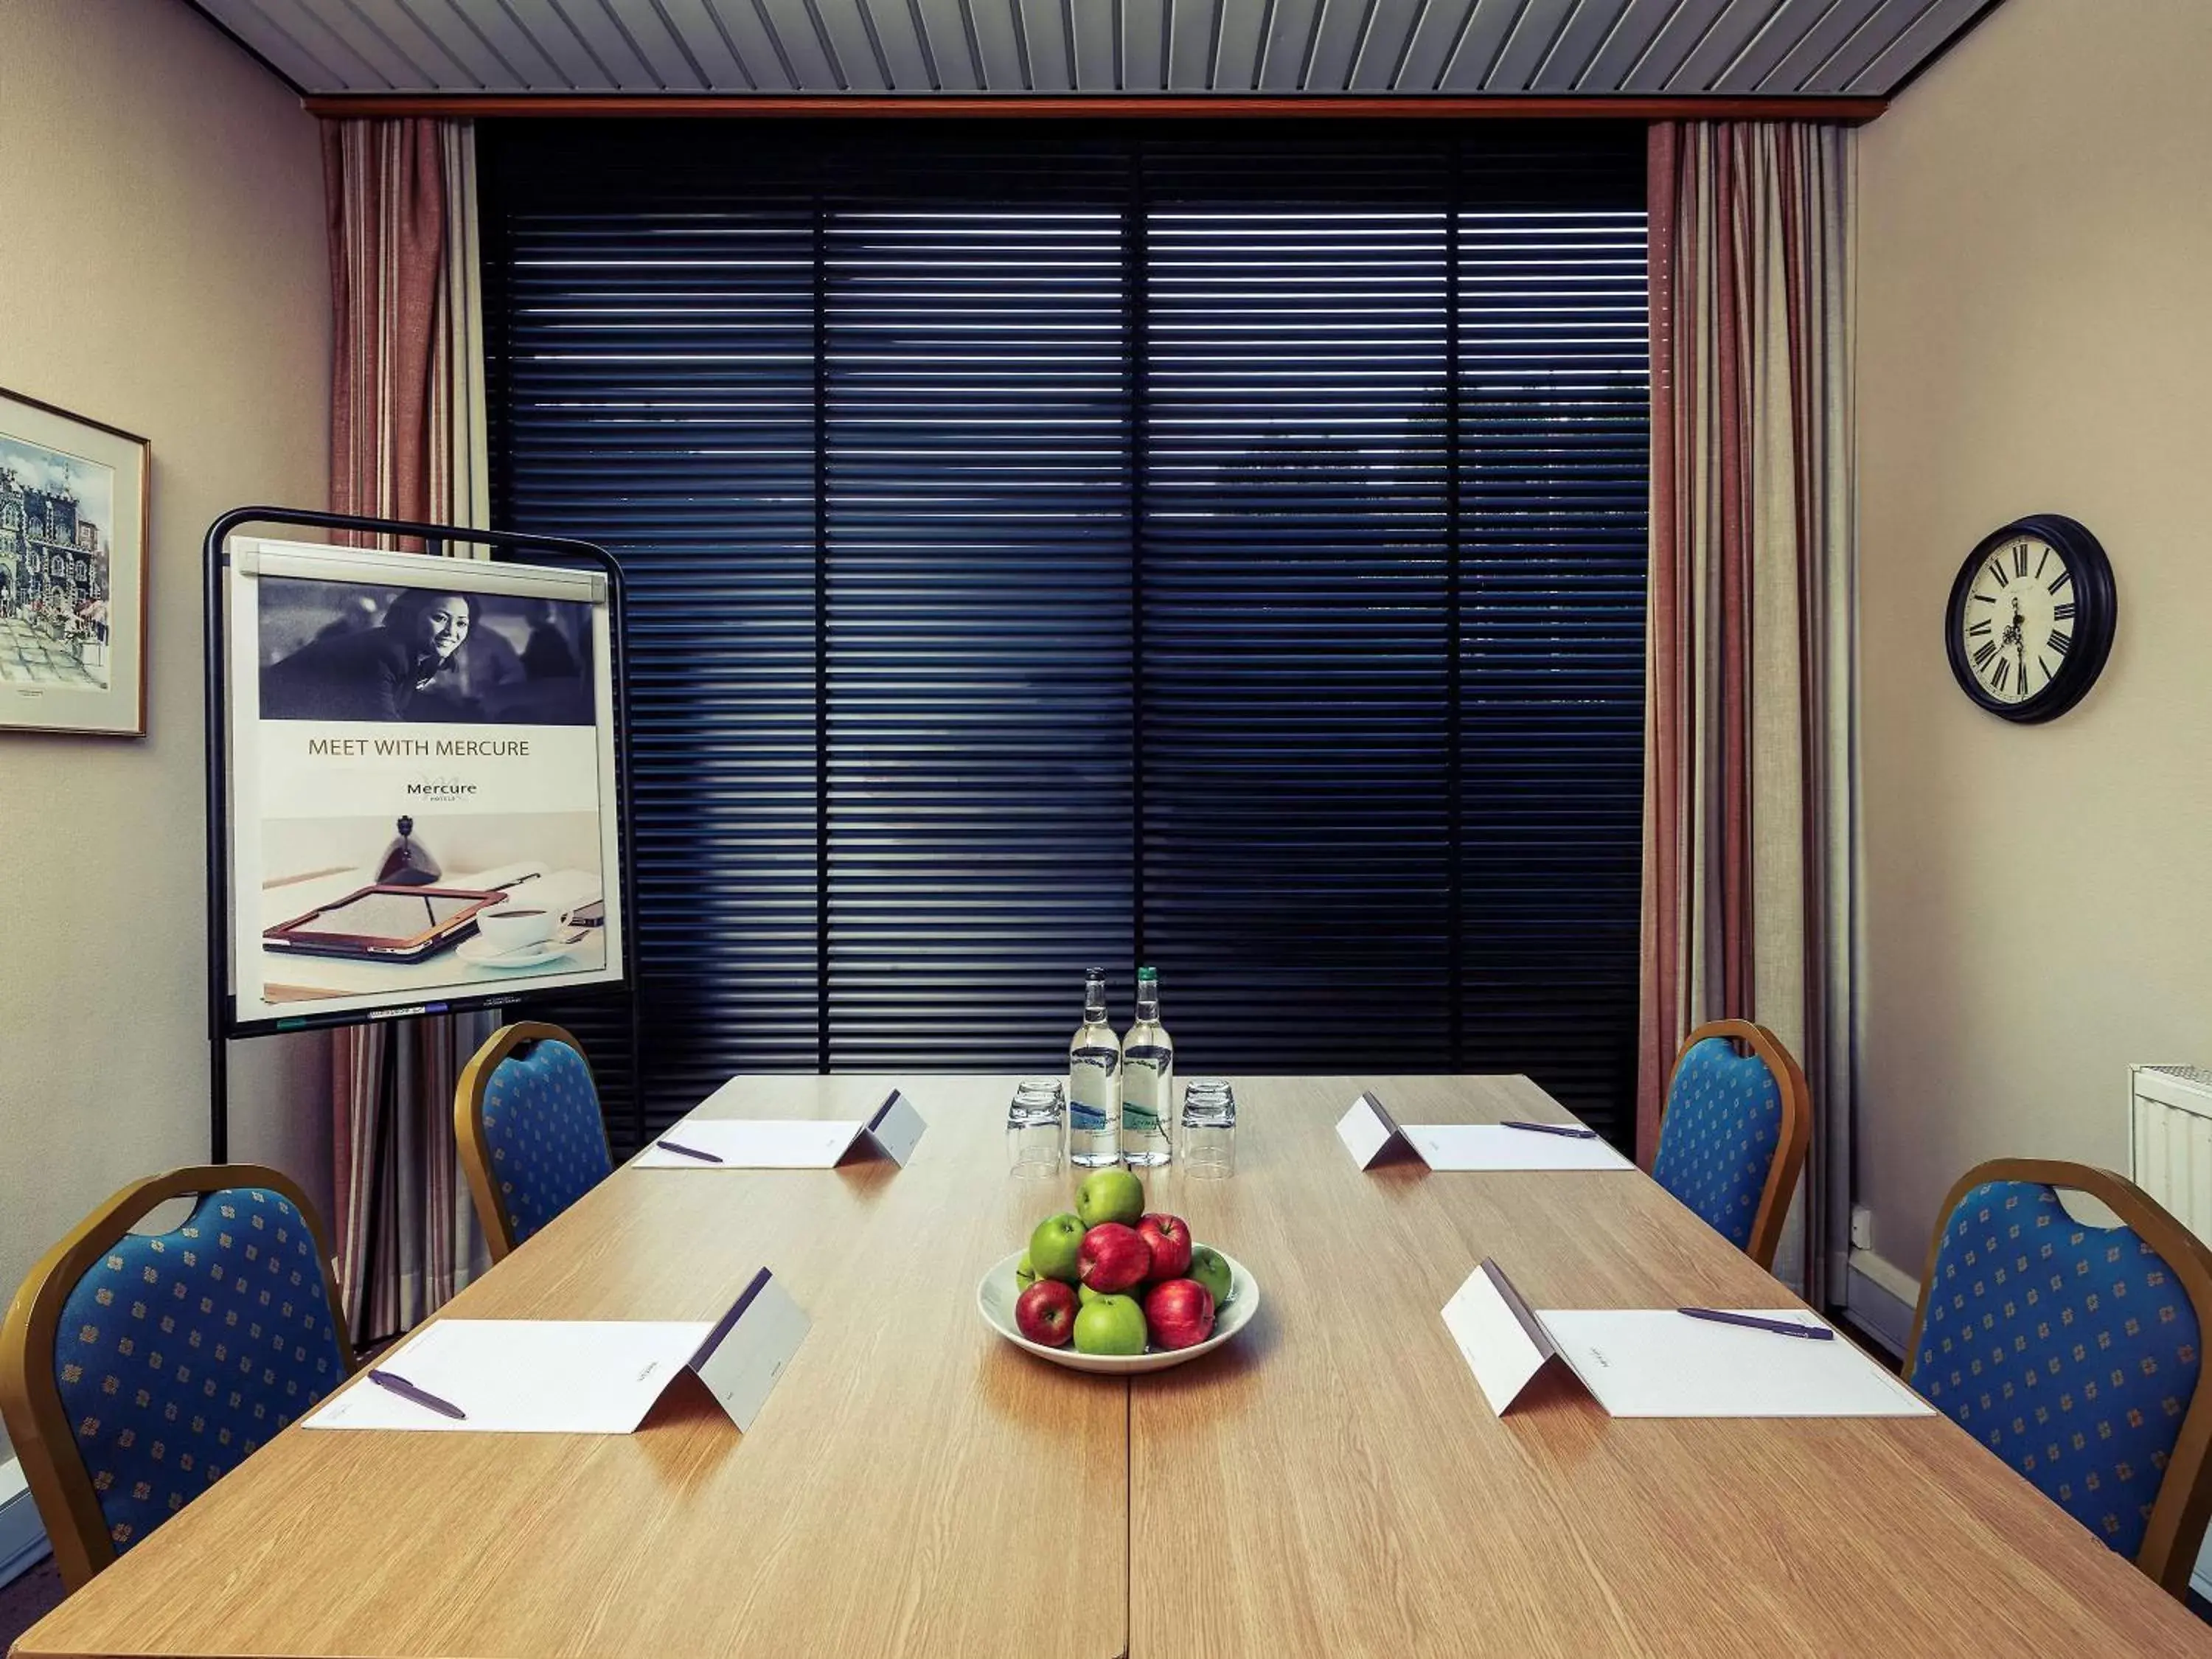 On site, Business Area/Conference Room in Mercure Norwich Hotel